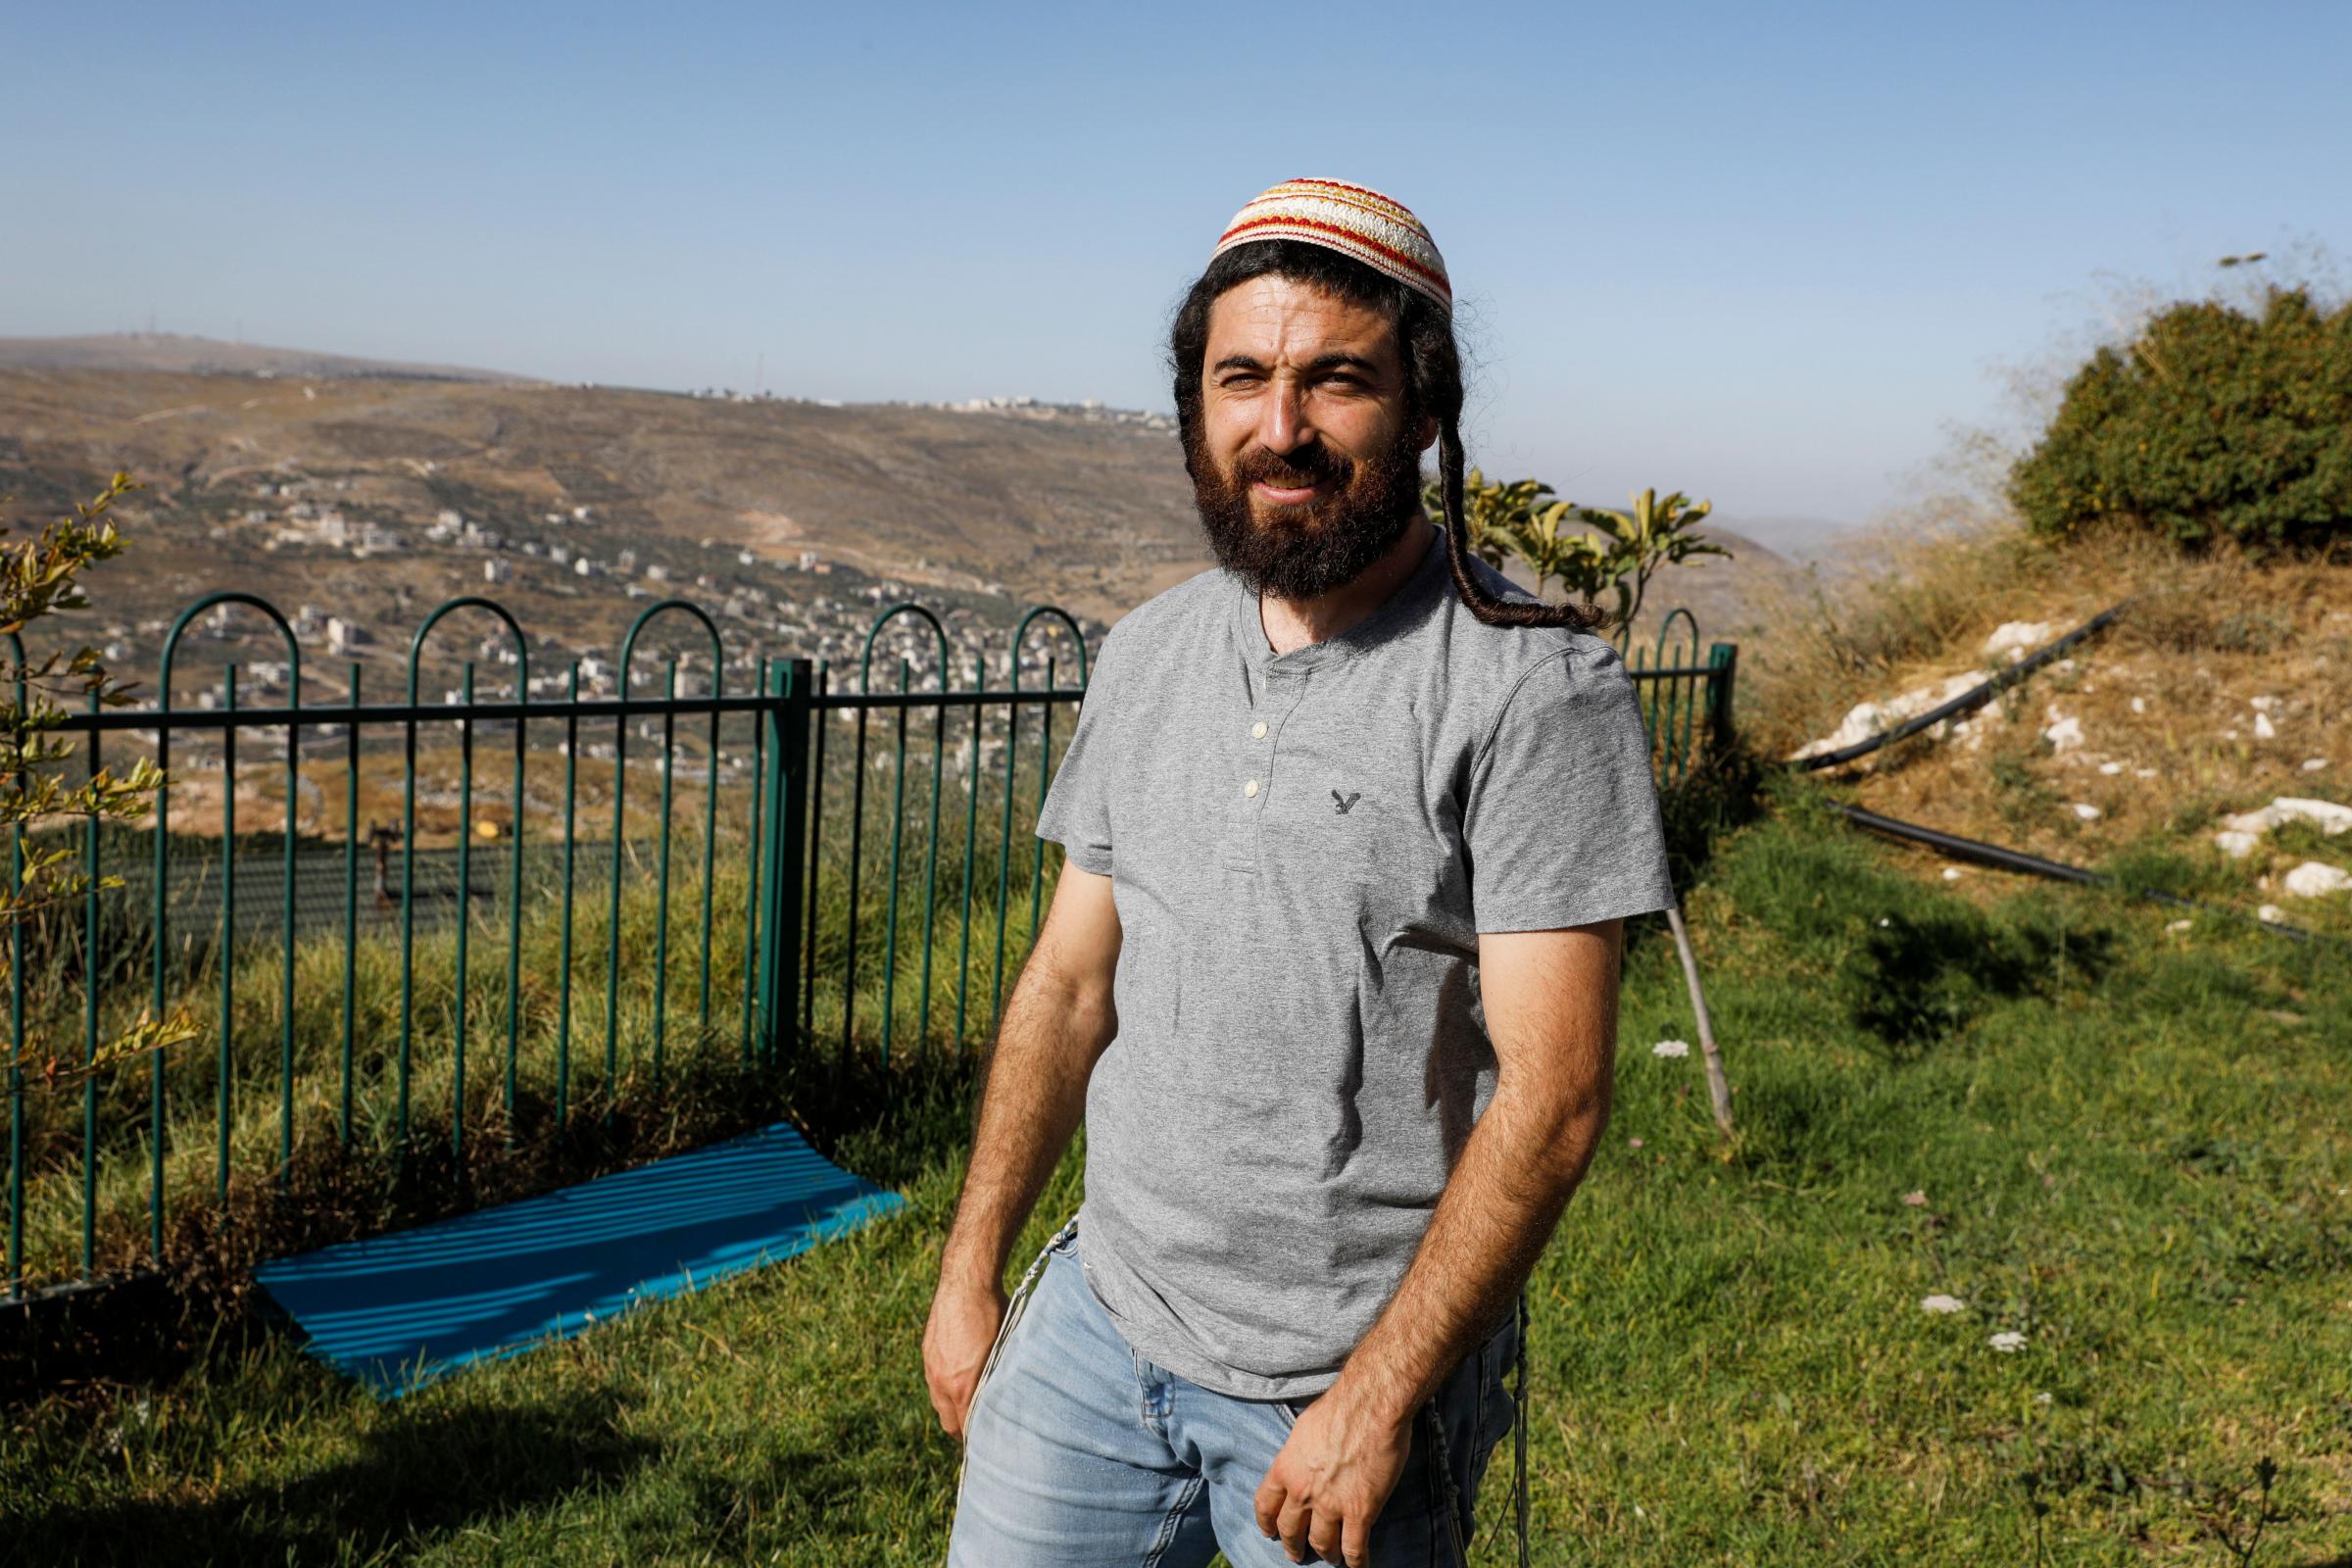 Tzvi Succot, the 29-year-old son of an ultra-Orthodox family, poses for a picture outside his home in the settlement of Yitzhar south of the Palestinian city of Nablus in the occupied West Bank, on June 22, 2020. - The 450,000 Israeli settlers in the